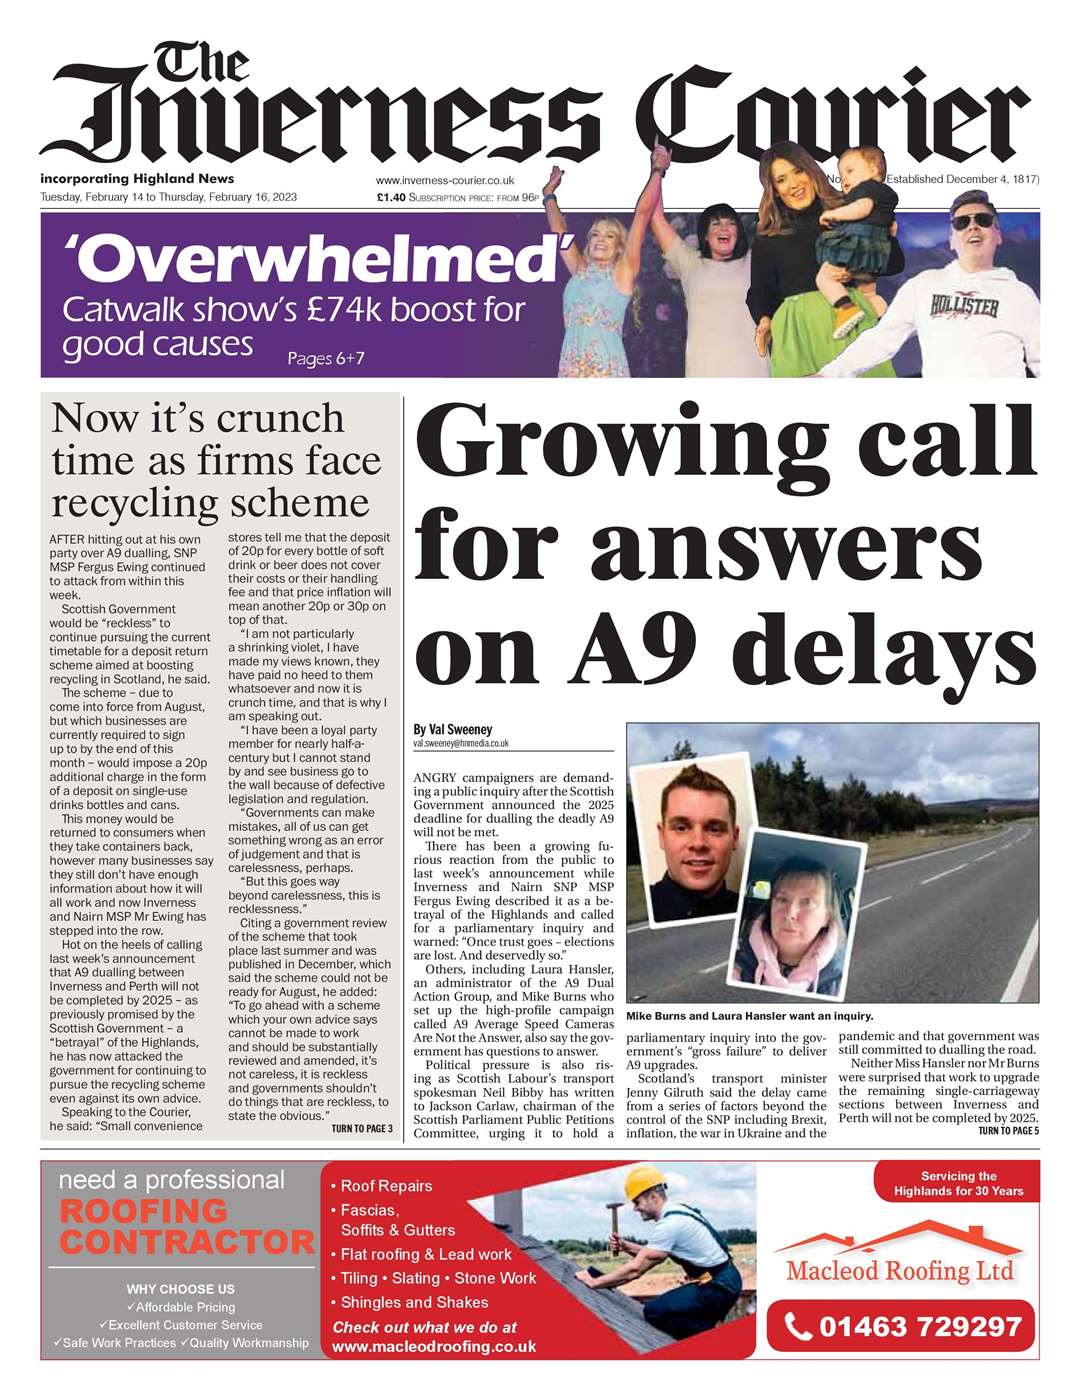 The Inverness Courier, February 14, front page.